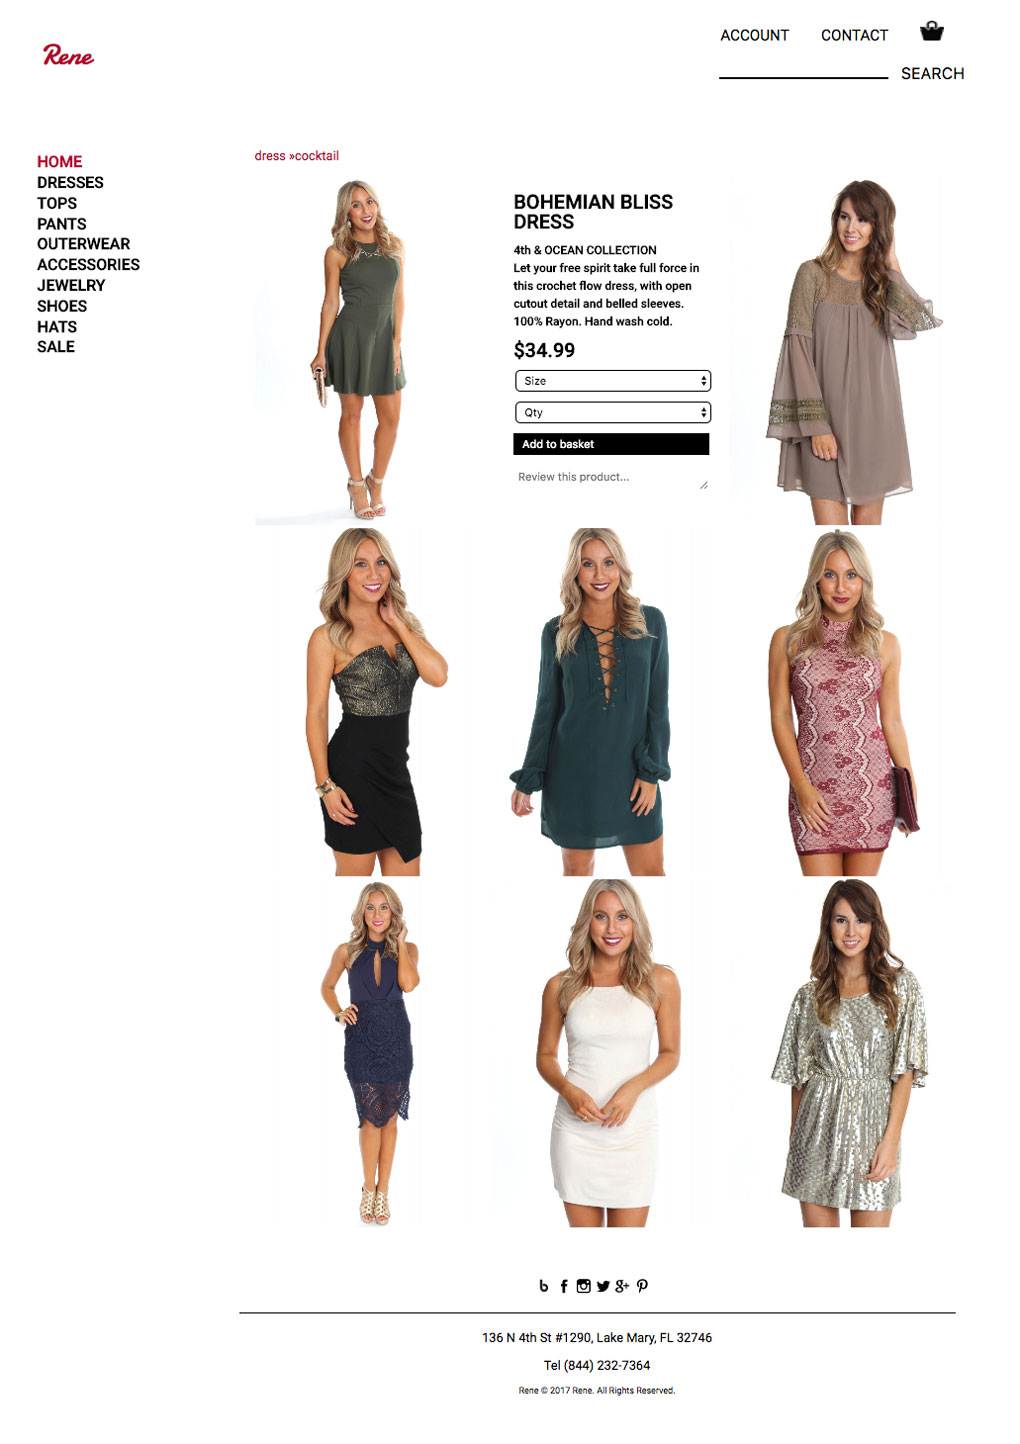 Comps for cocktail dresses